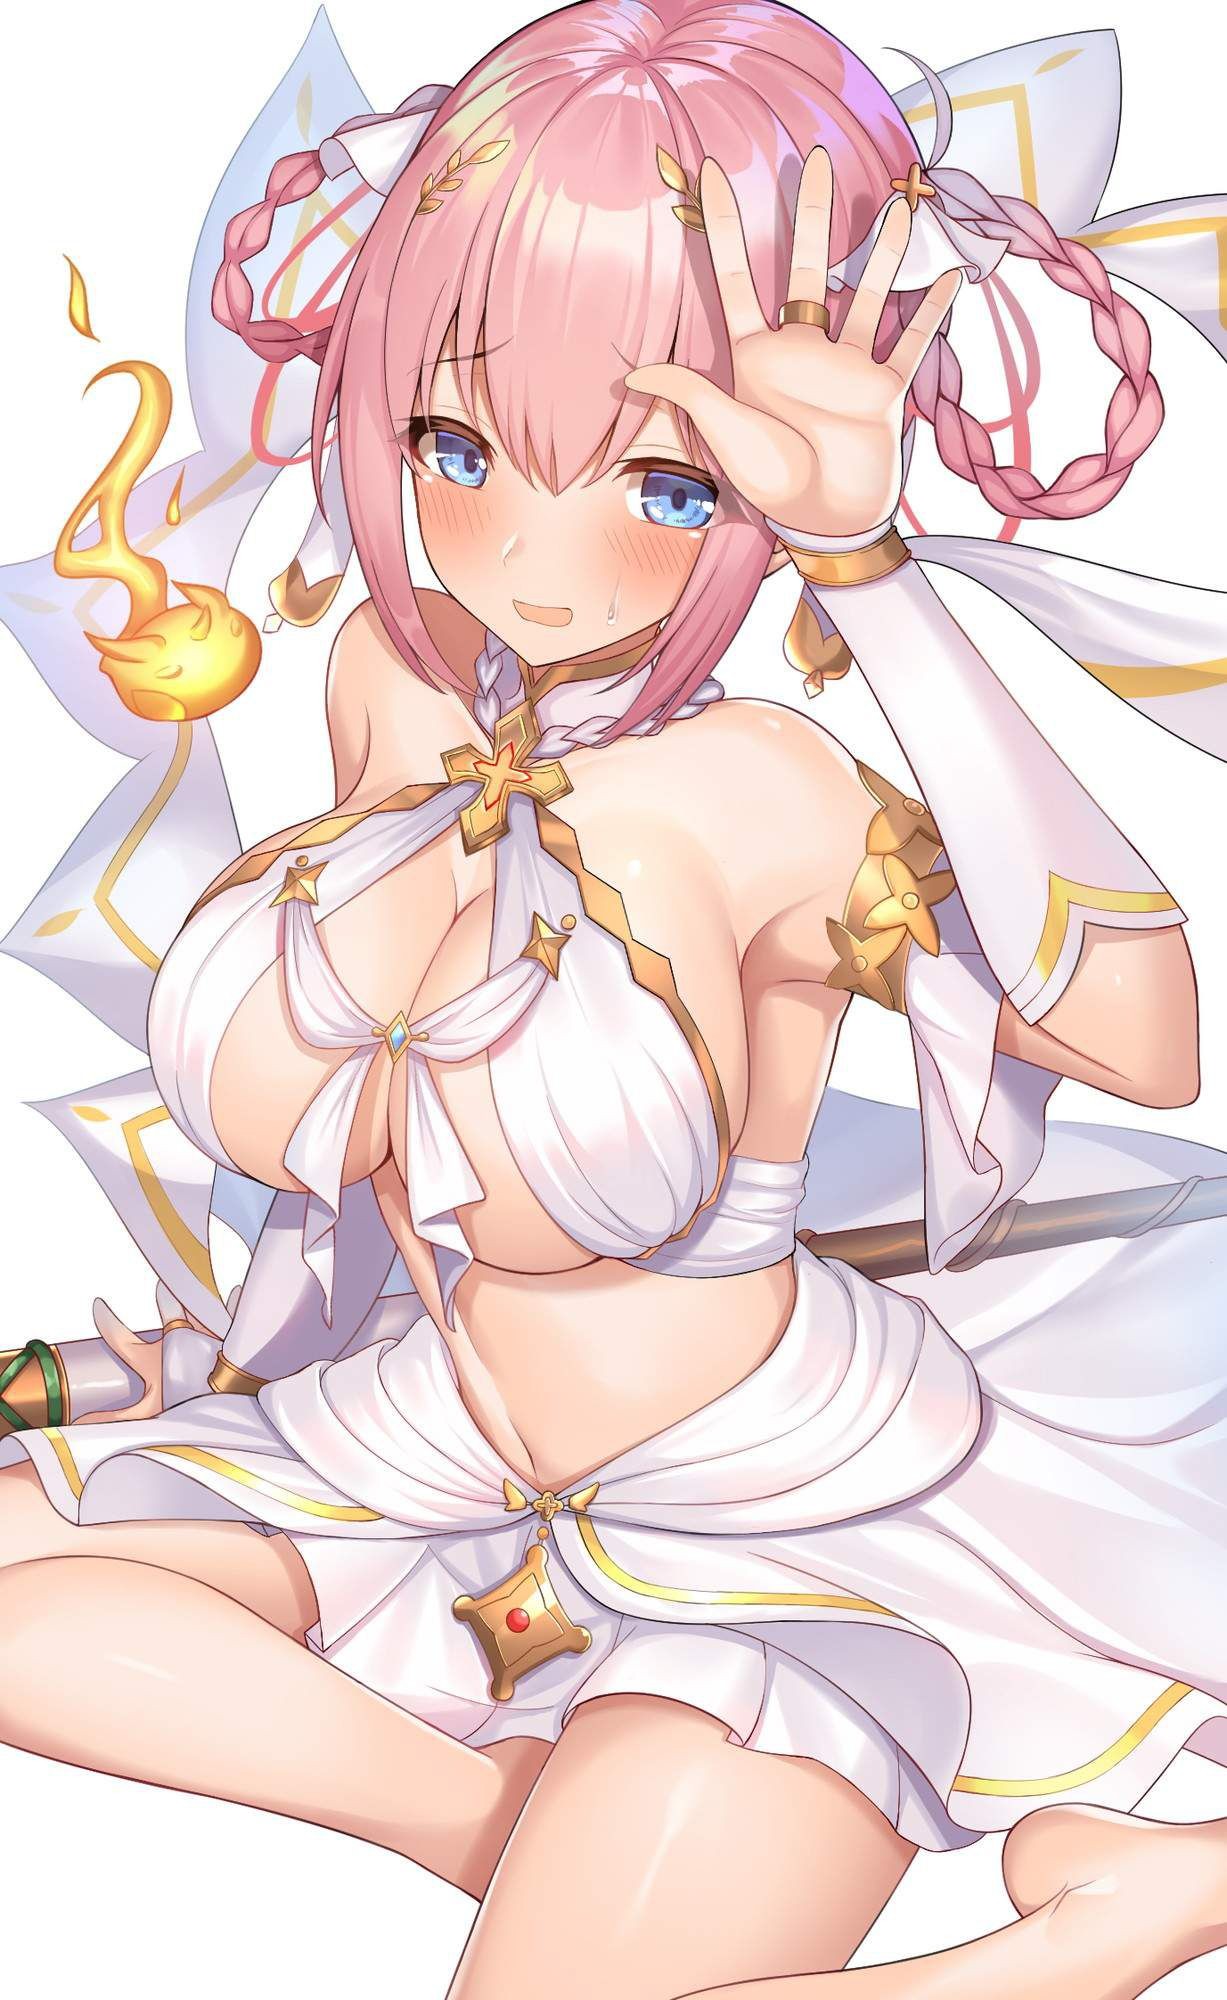 Gostosa [Princess Connect! ] Erotic Image That Yuy Who Wants To Appreciate According To The Erotic Voice Of The Voice Actor Gay Reality